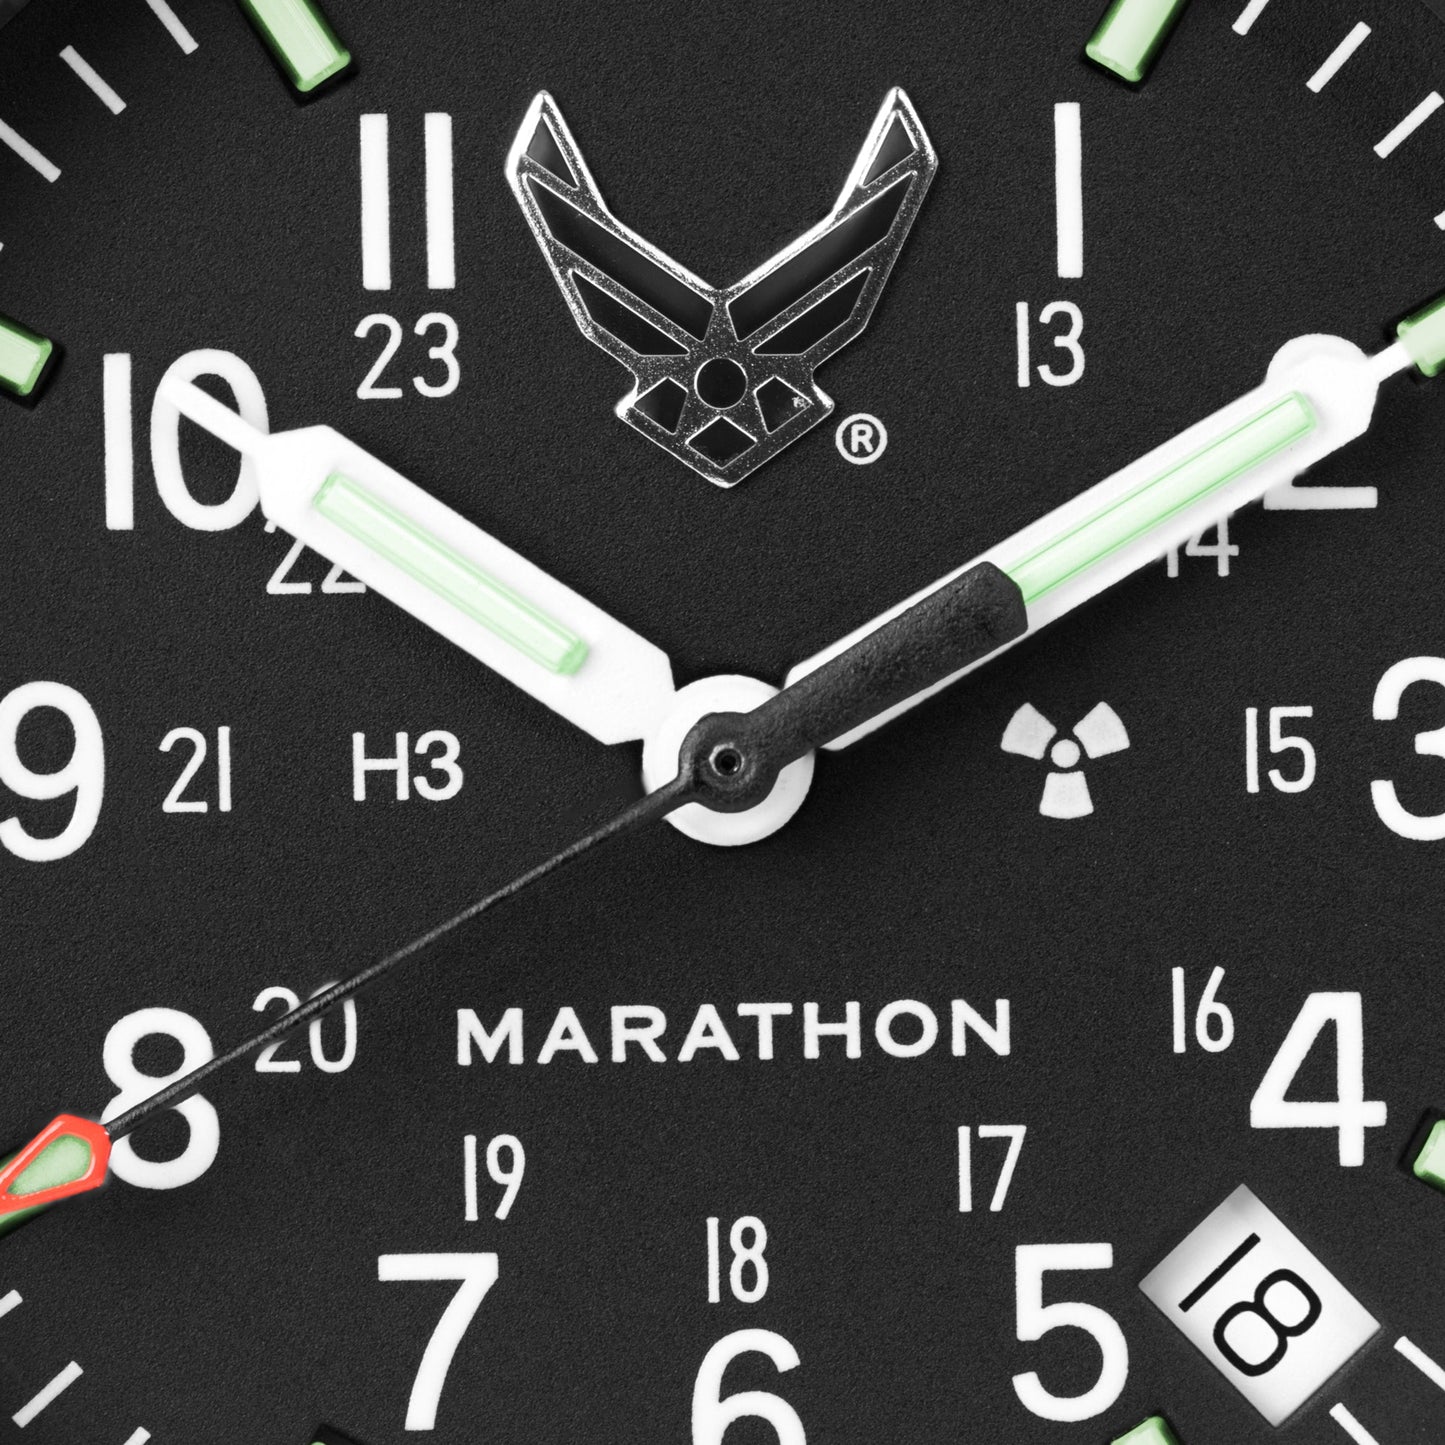 MARATHON 36mm Official USAF™ Officer's Watch with Date (GPQ)